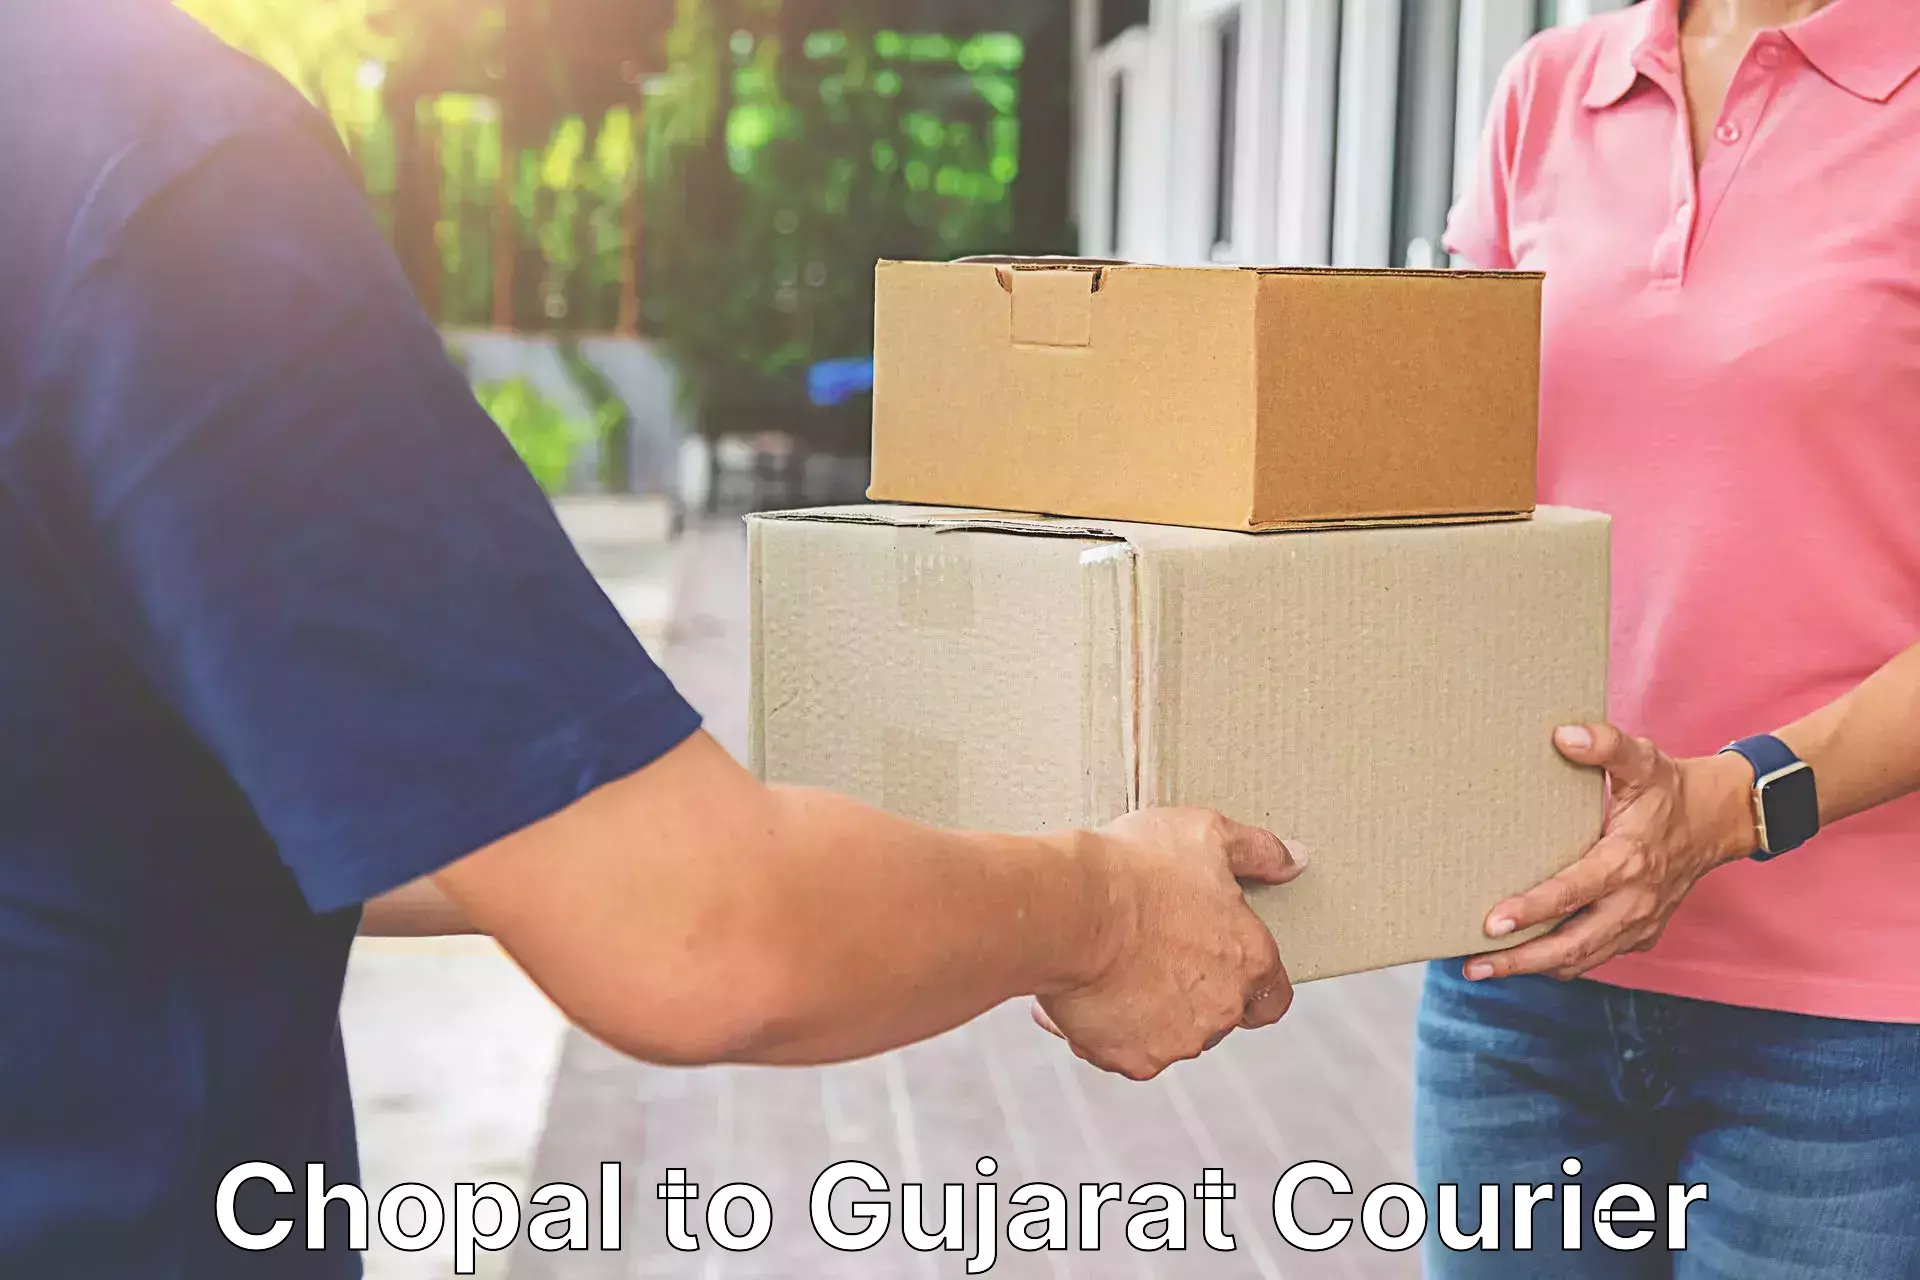 Delivery service partnership Chopal to Anand